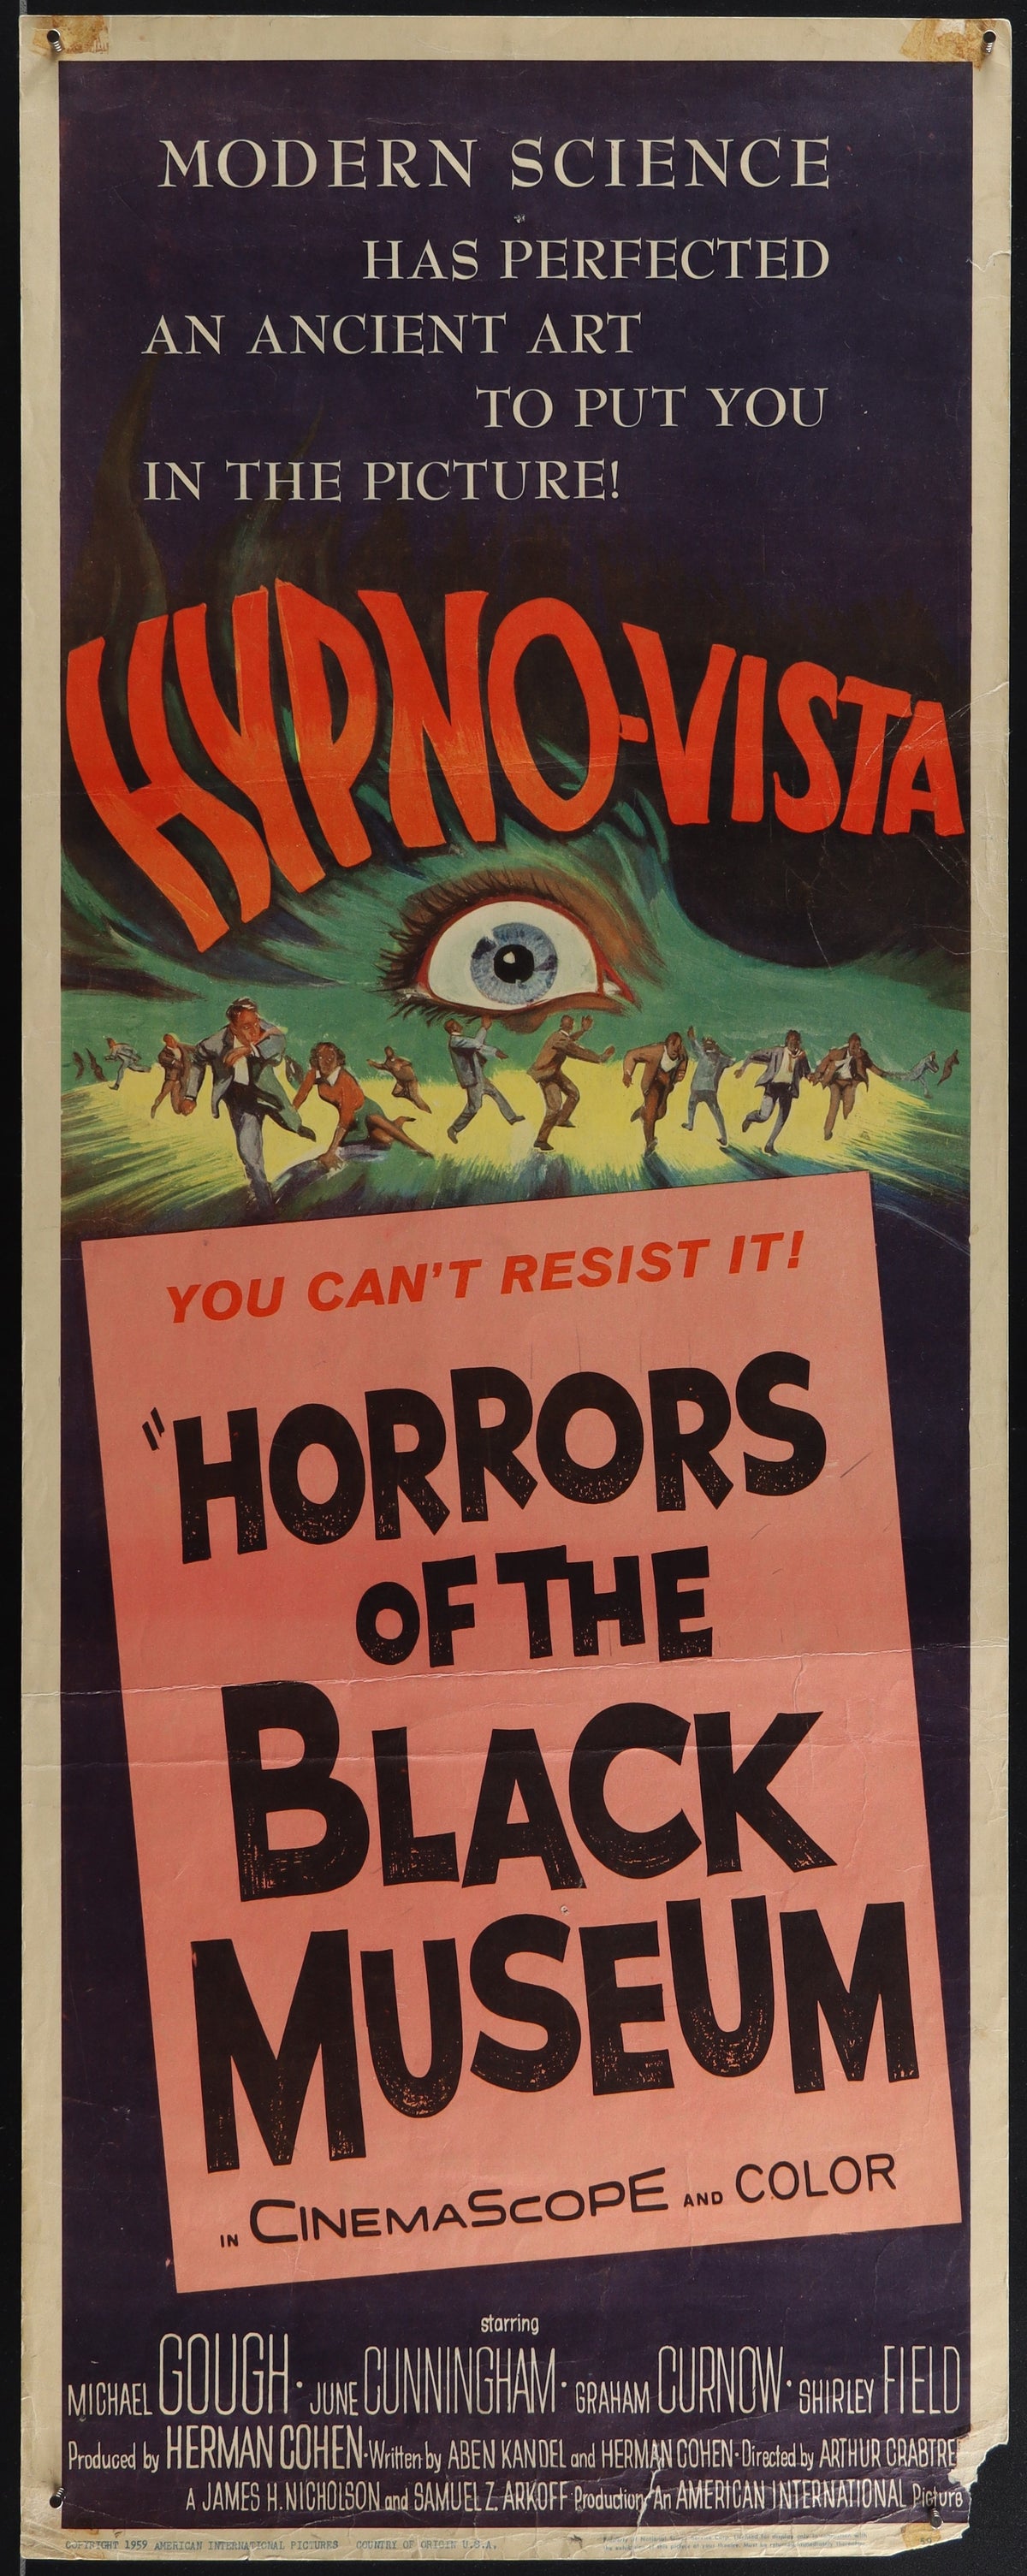 Horrors of the Black Museum - Authentic Vintage Poster